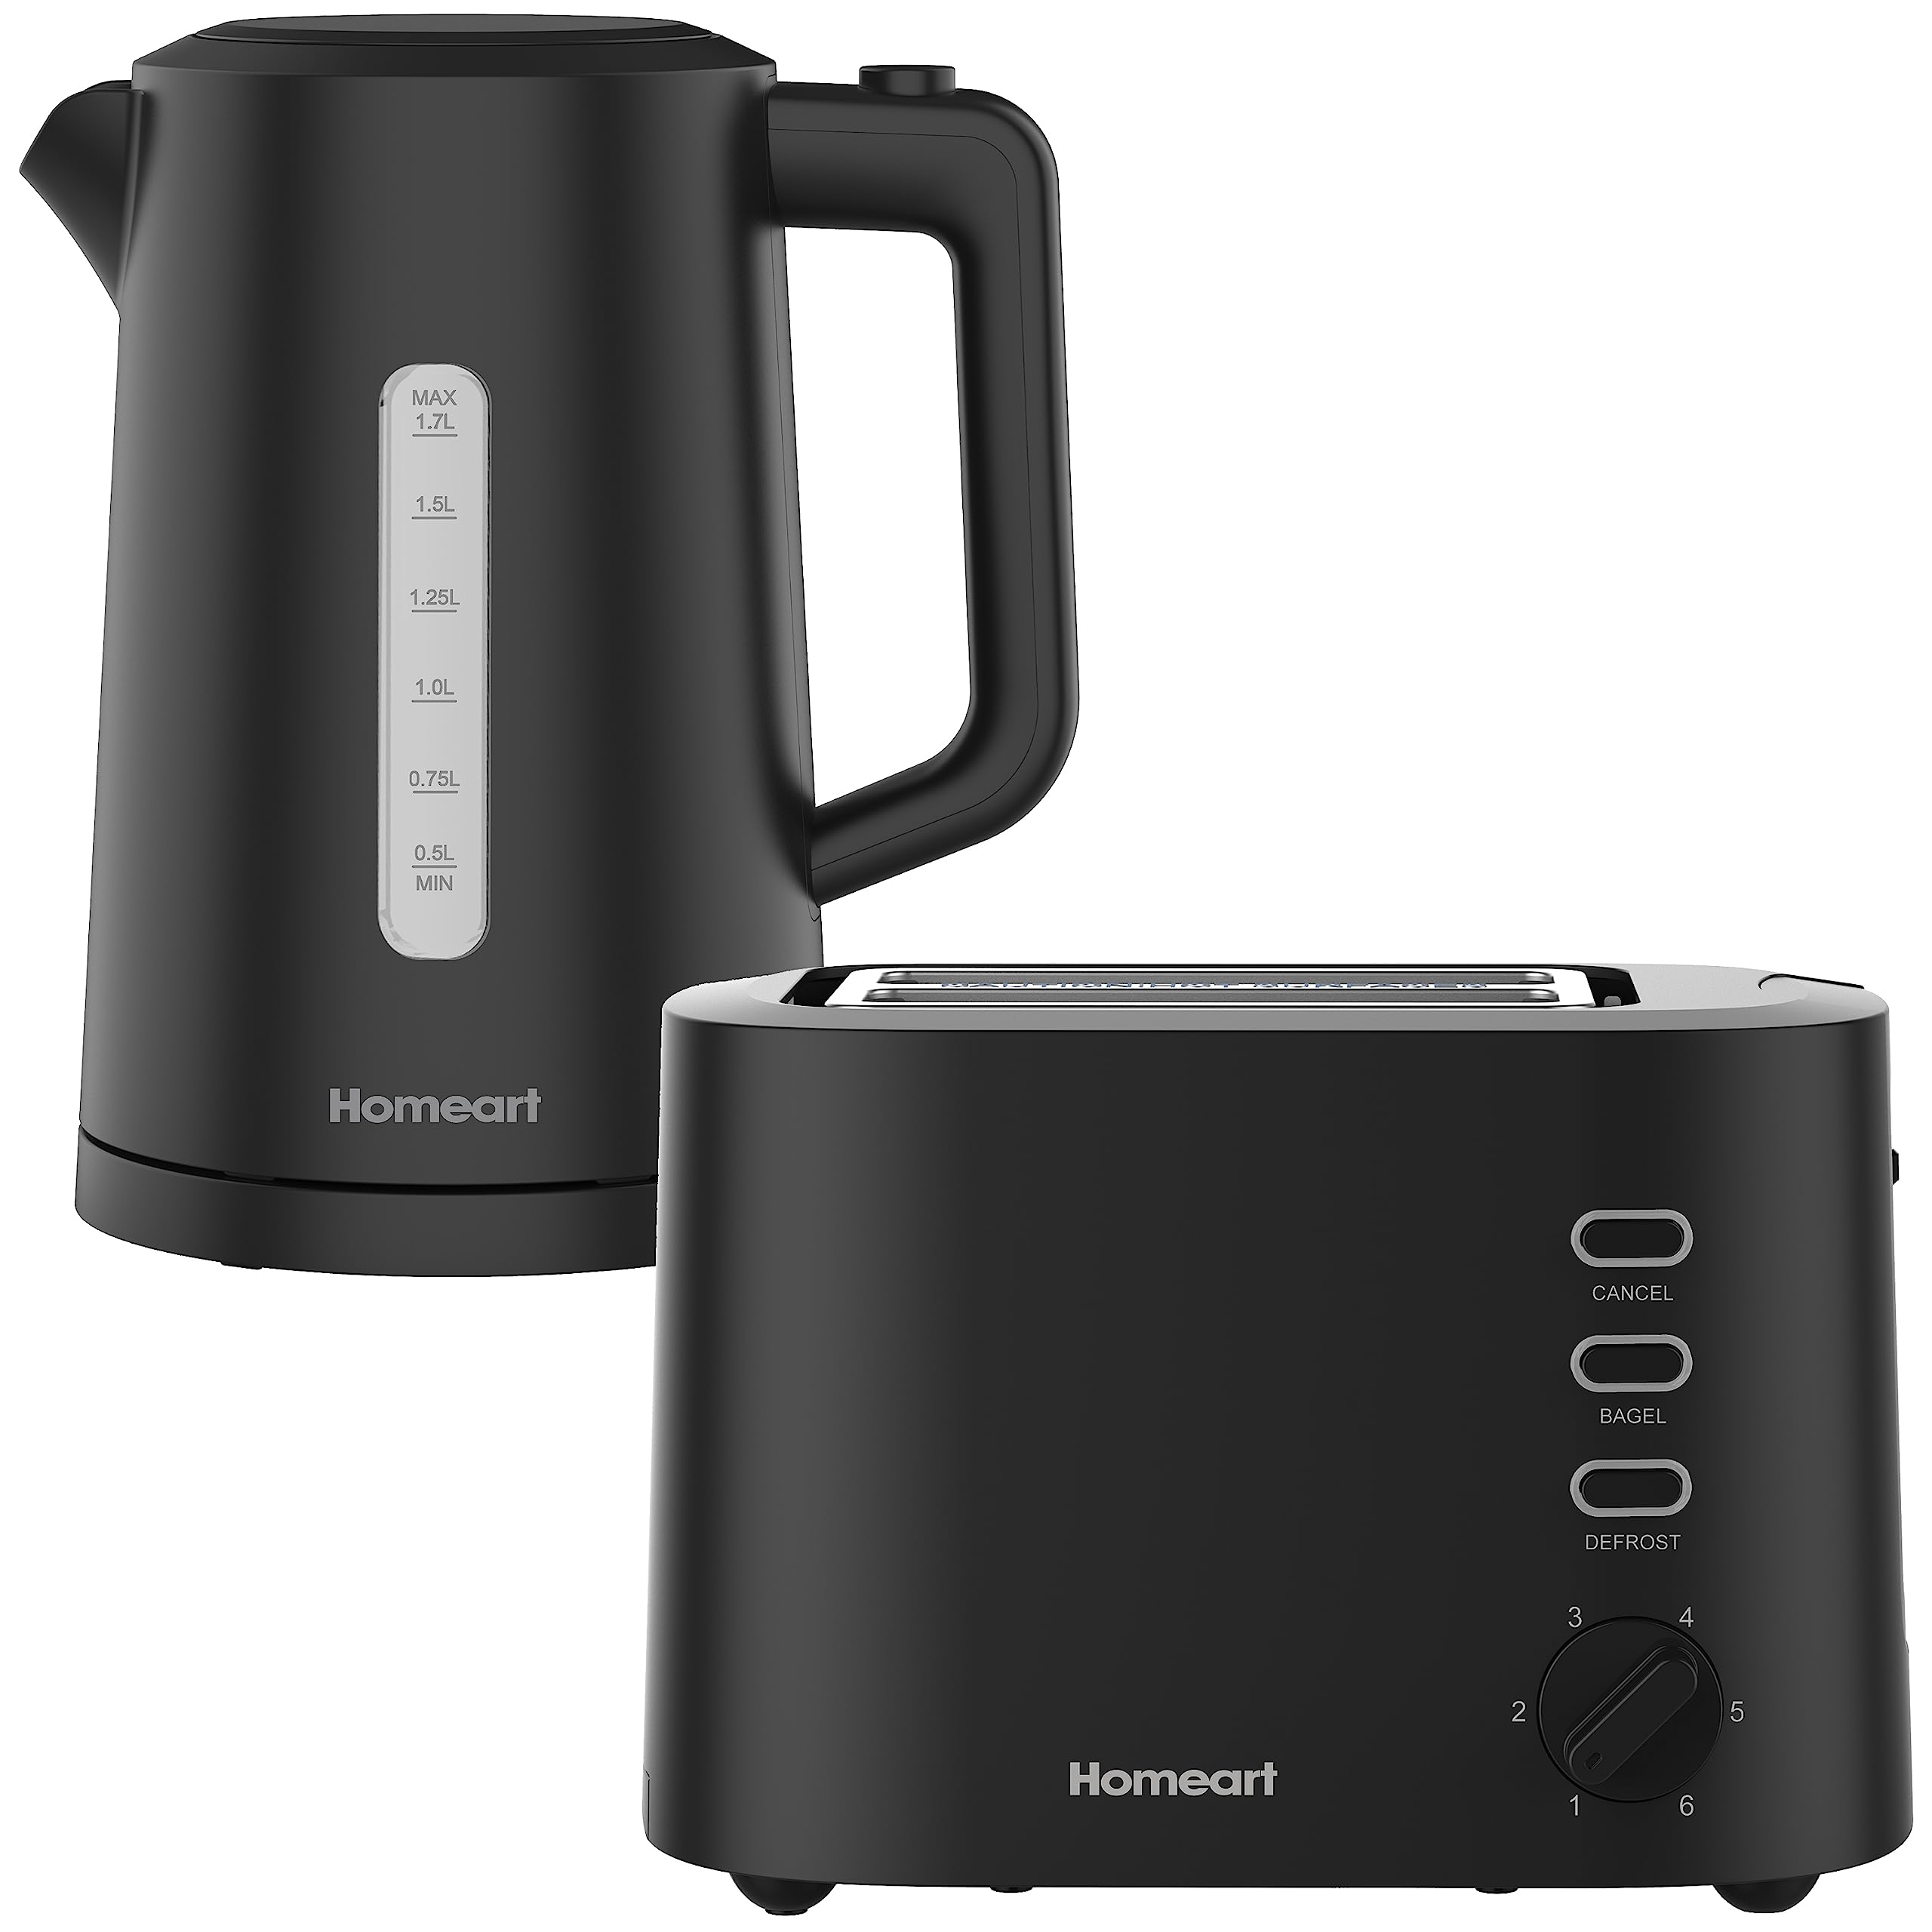 Homeart Staple Cordless Electric Kettle Stainless Steel With Removable Filter and 2-Slice Toaster Stainless Steel With Removable Crumb Tray Combo, Black